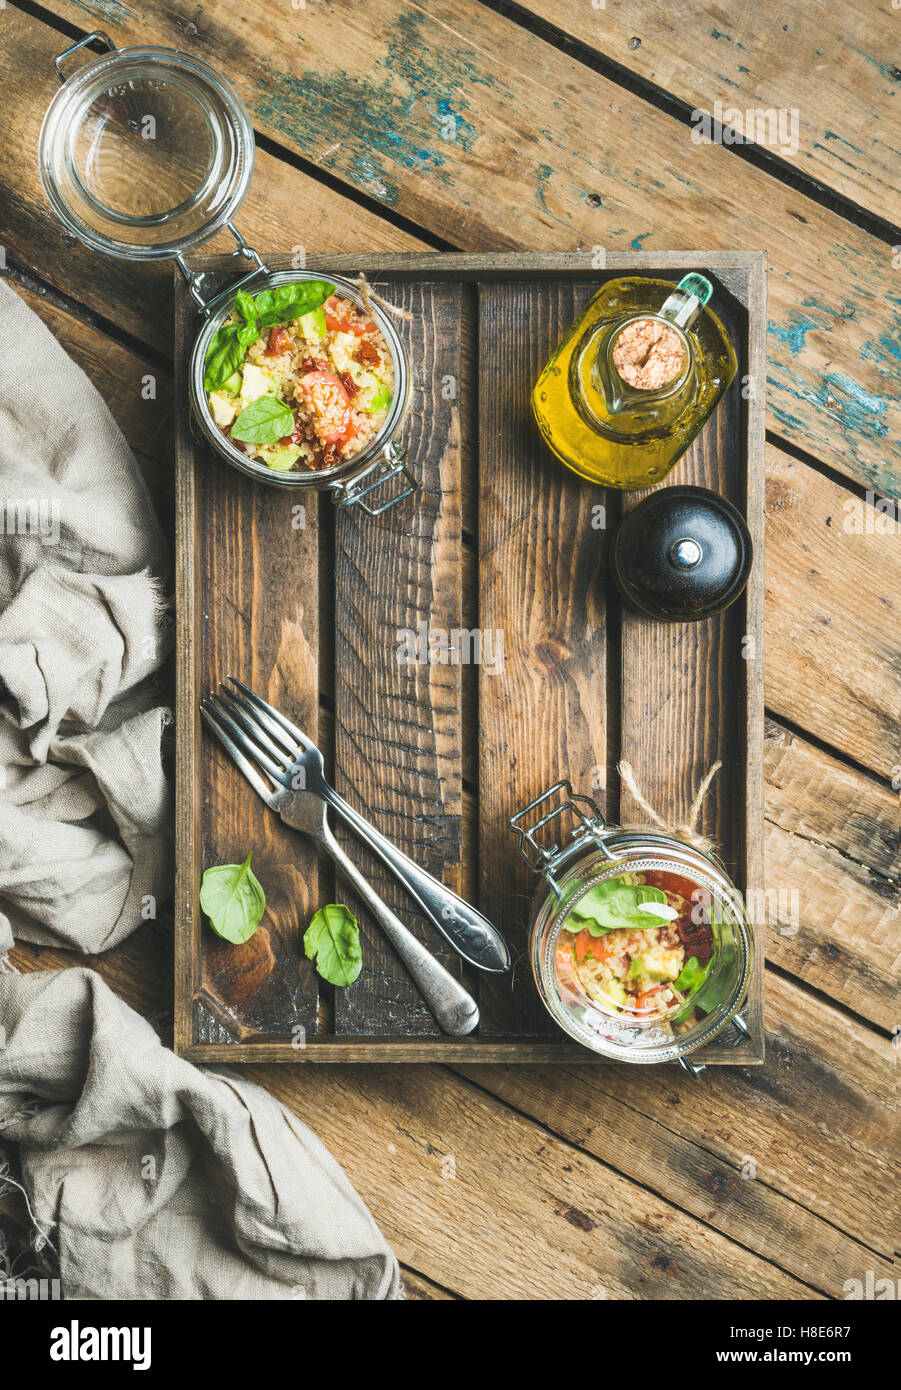 Healthy glass jar quinoa salad with cherry and sun-dried tomatoes, avocado, basil in wooden box over rustic background, top view Stock Photo